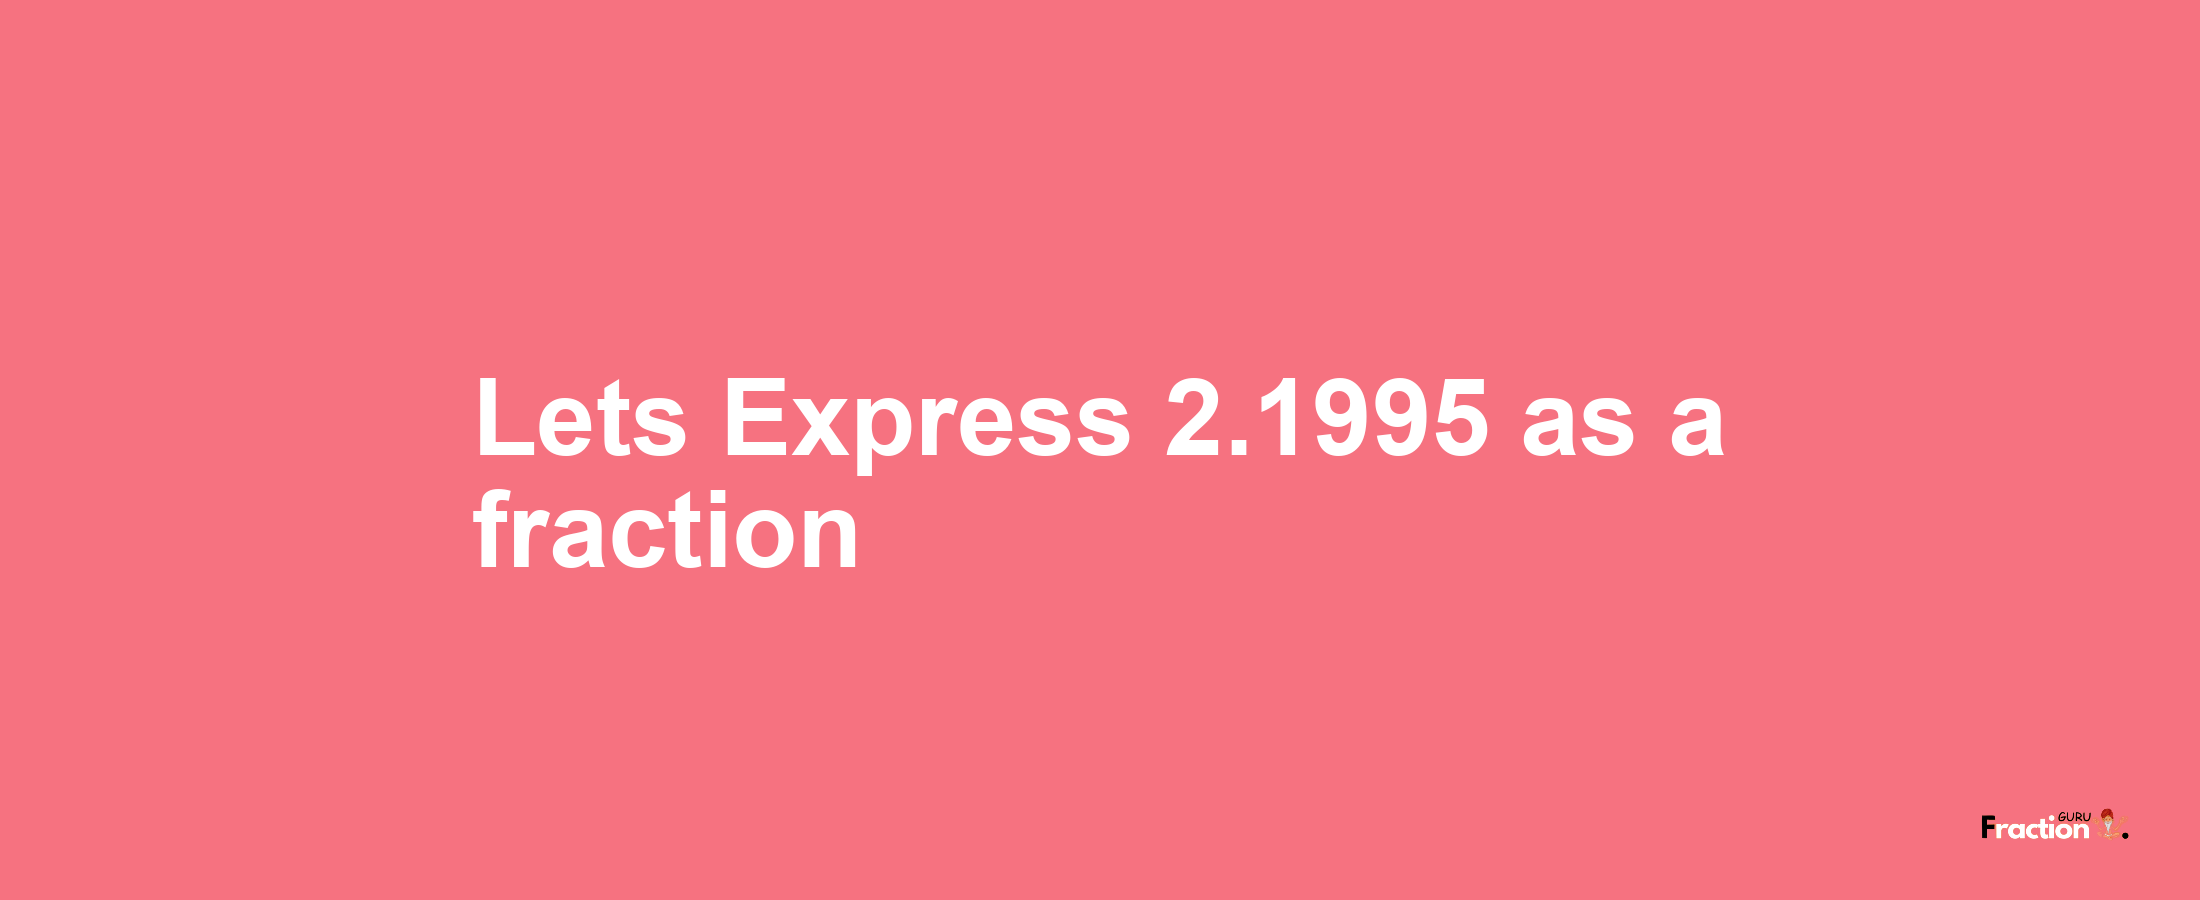 Lets Express 2.1995 as afraction